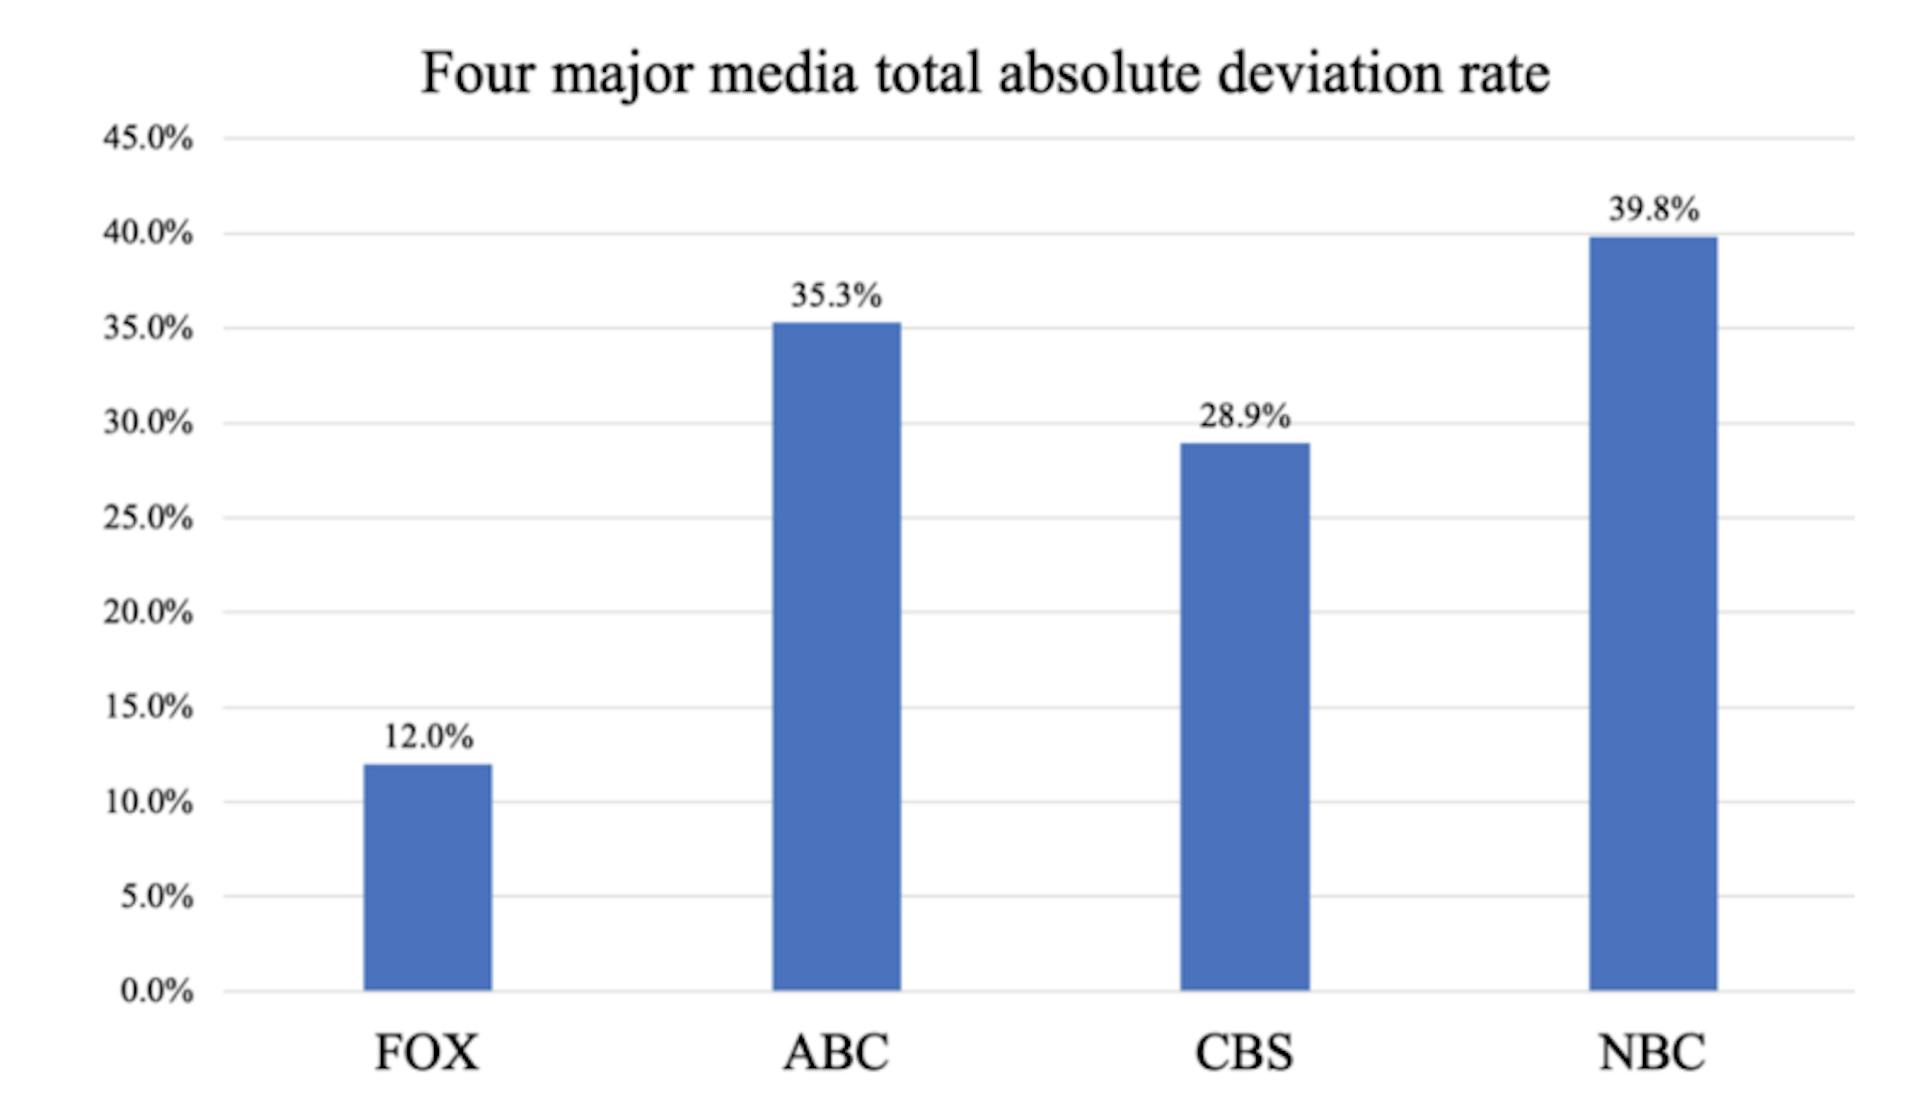 Figure 7. Four major media total absolute deviation rate